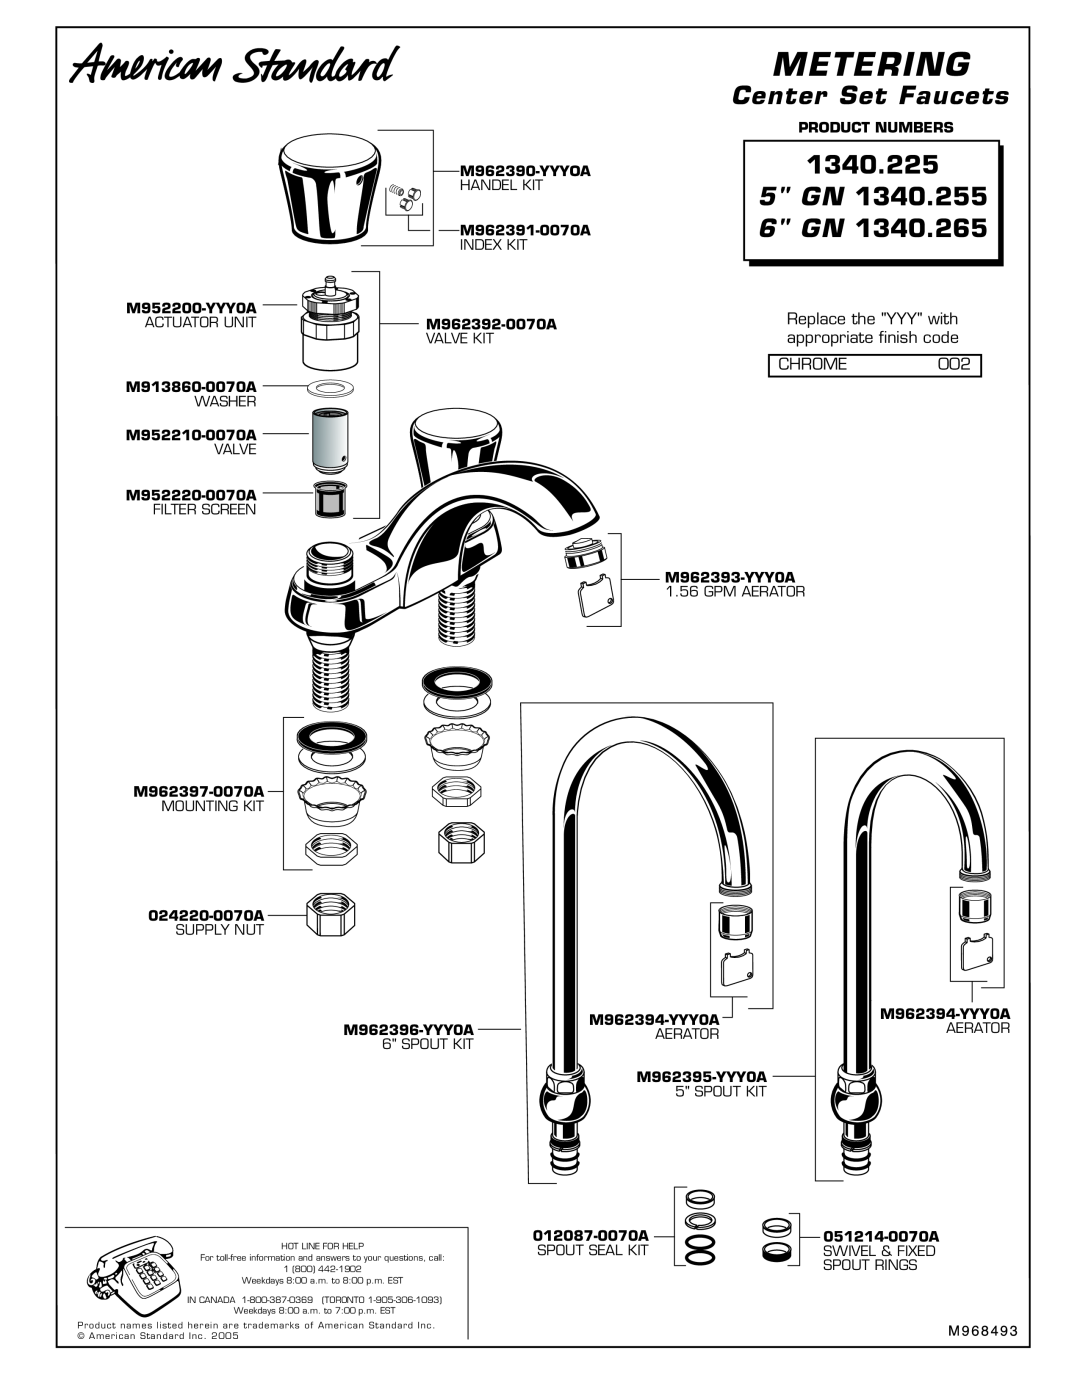 American Standard 024220-0070A manual Metering, Center Set Faucets, 1340.225, 5 GN, 6 GN, Replace the YYY with, Chrome 